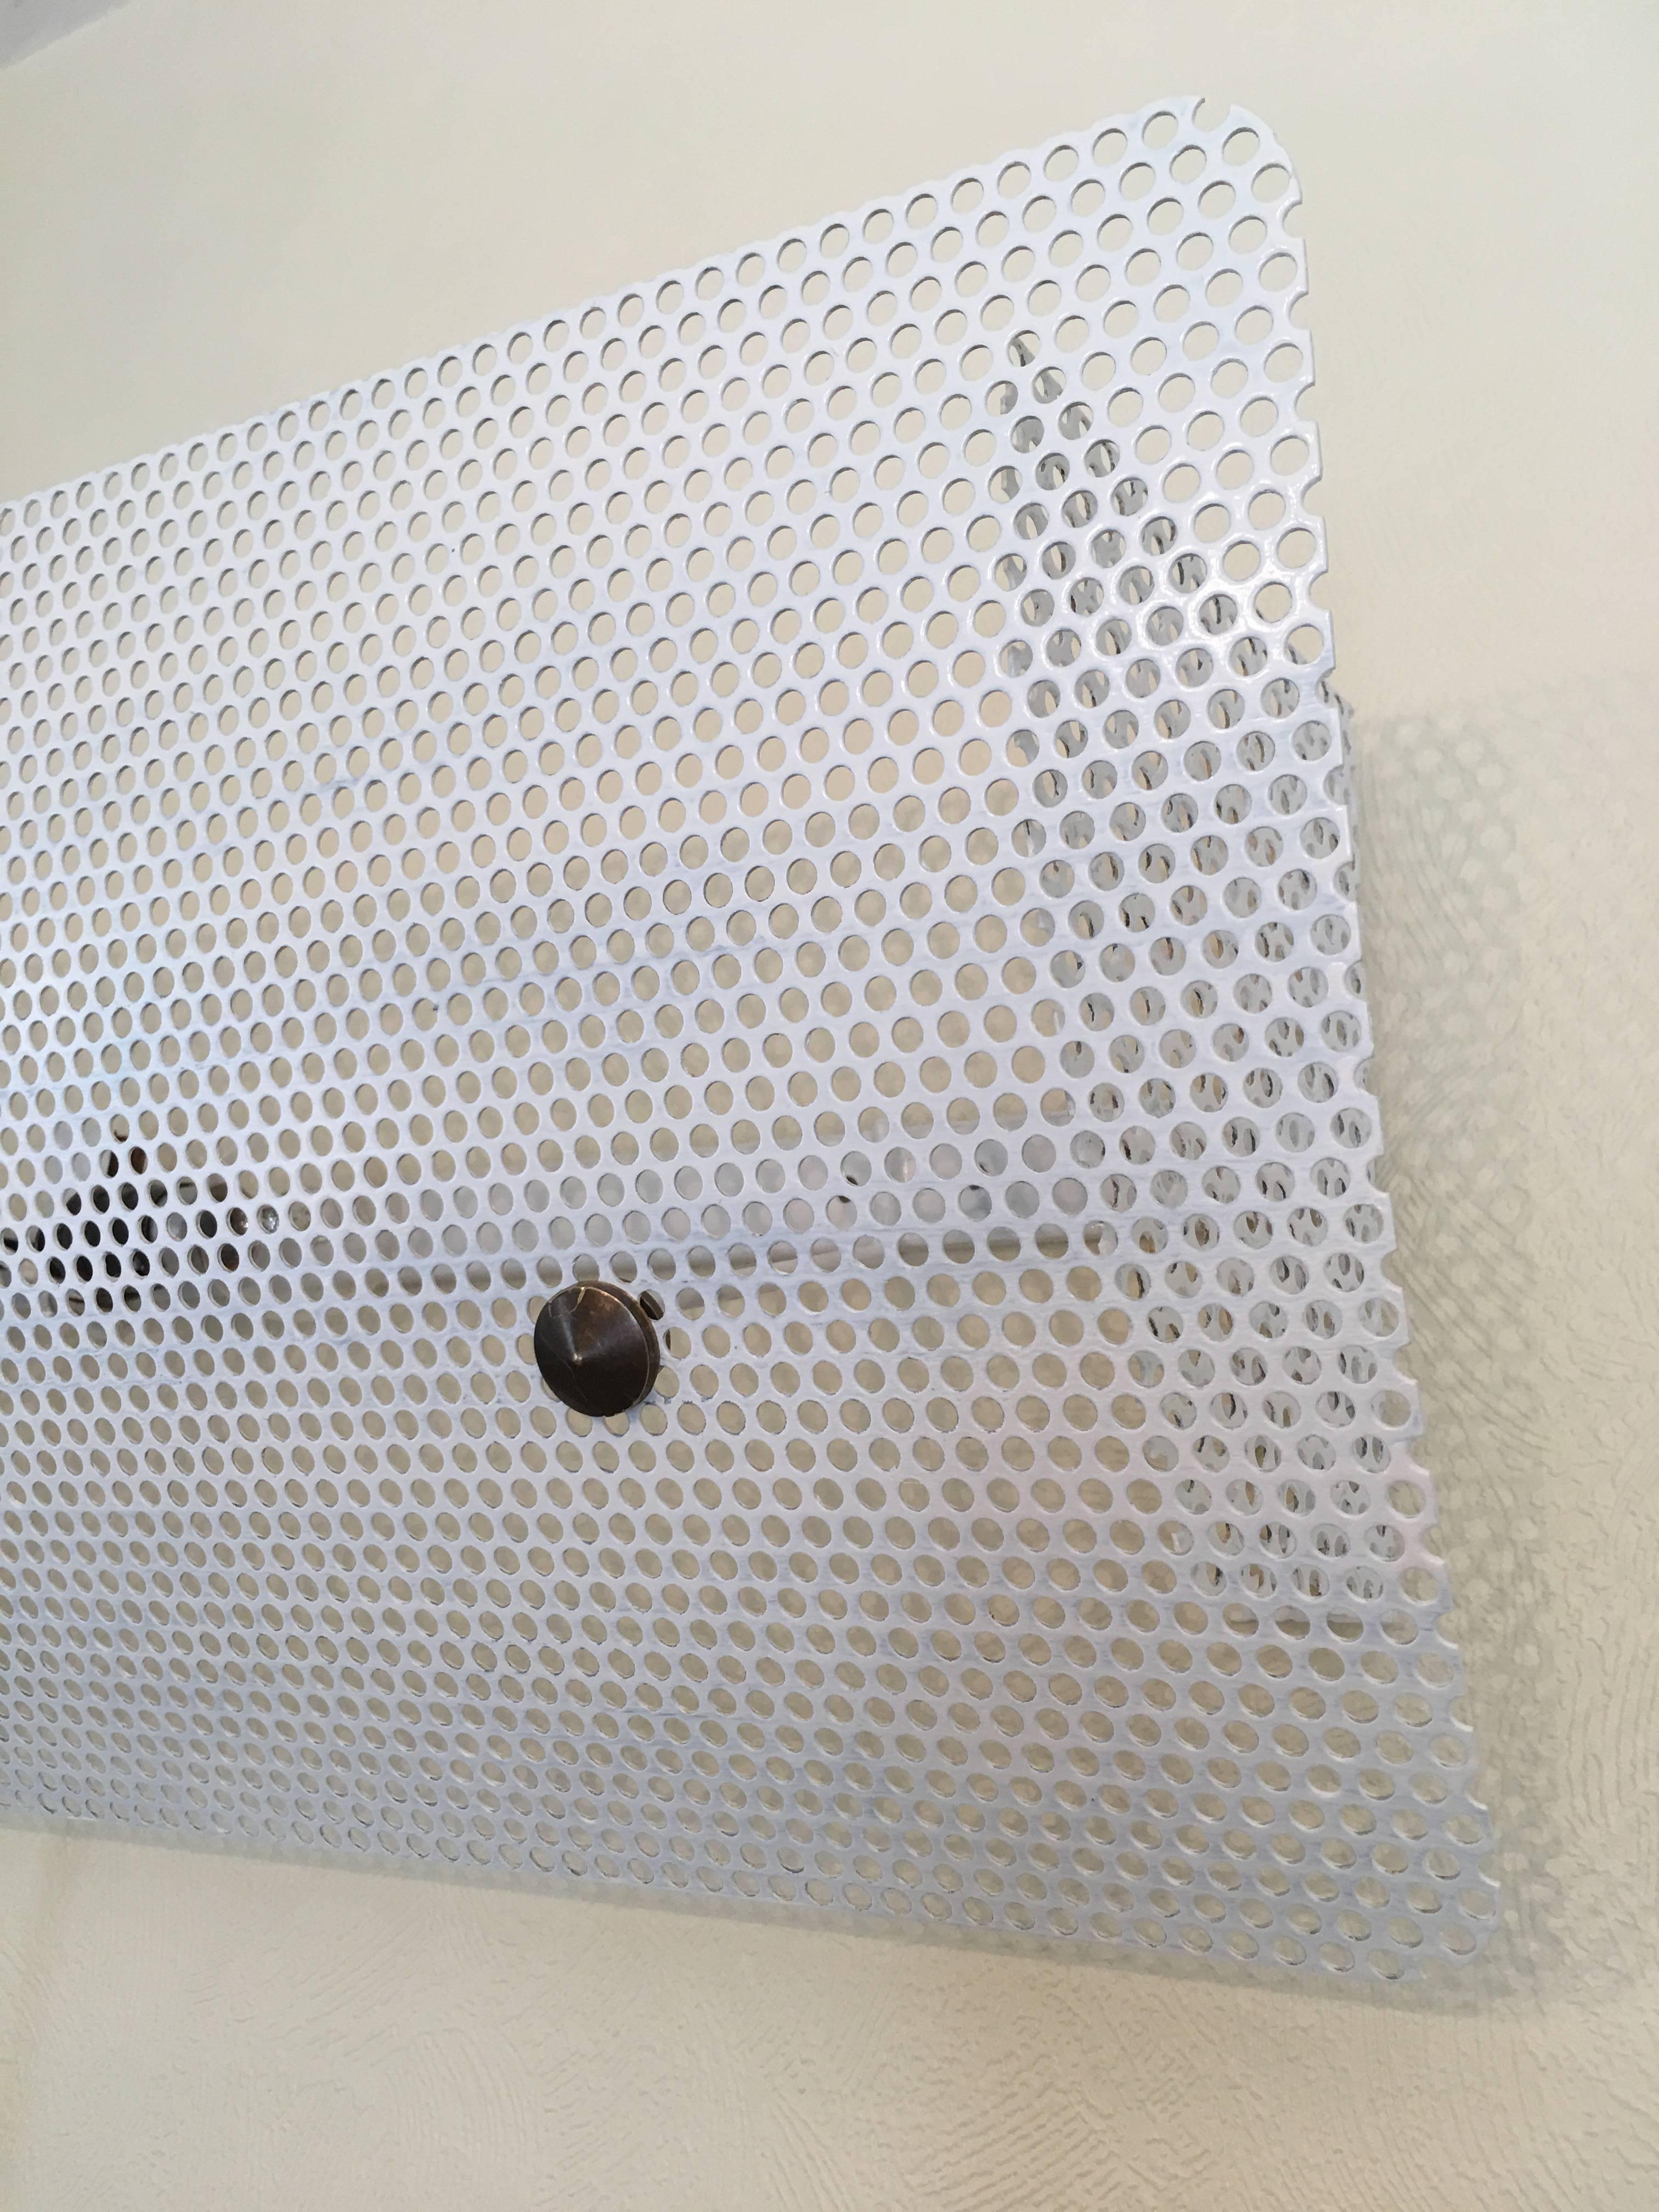 Pierre Guariche G320 Large White Perforated Metal Wall Lamp, 1952, France For Sale 1